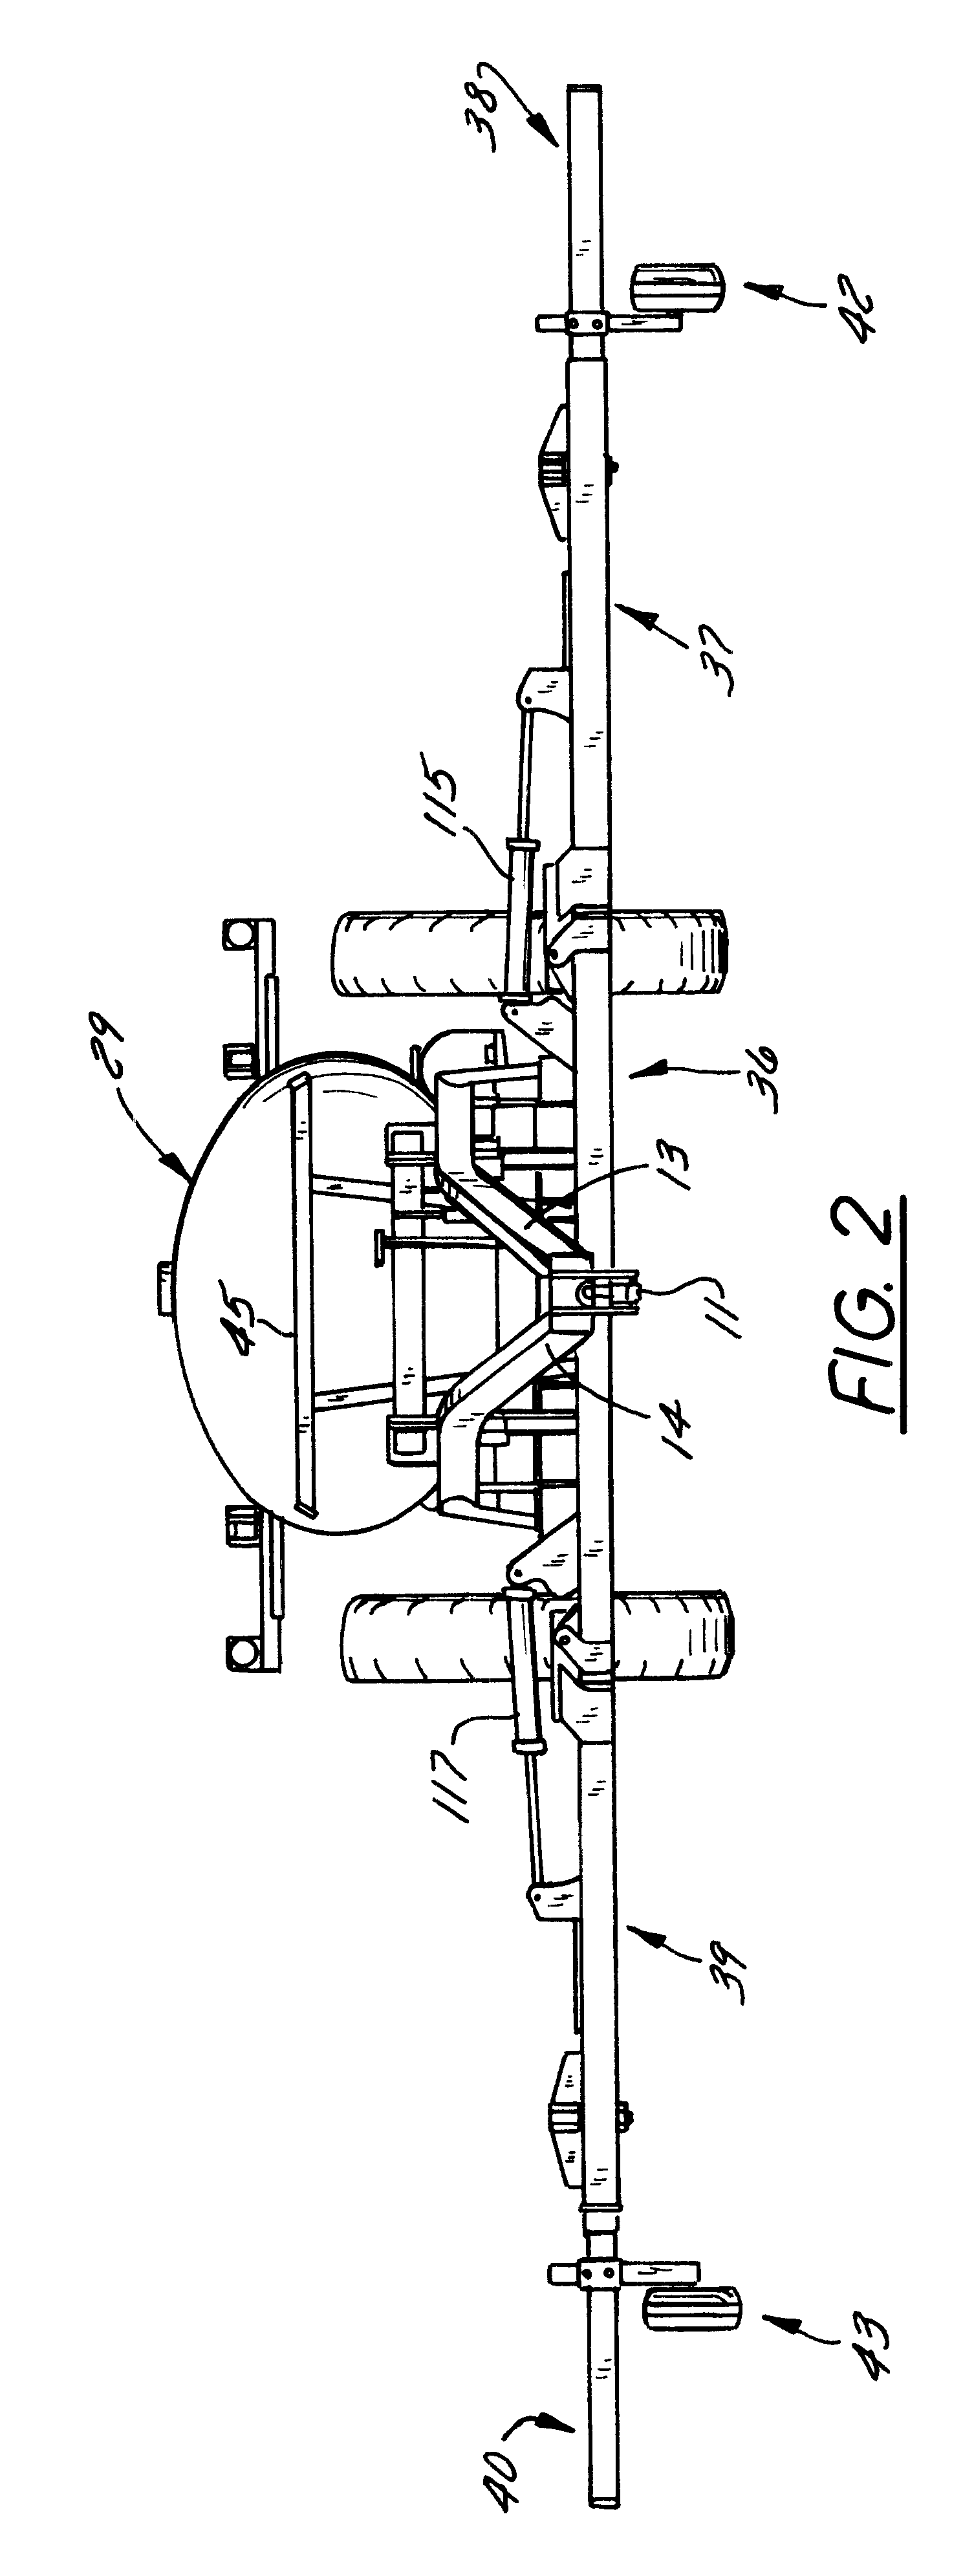 Flexible toolbar and operating hydraulic circuit